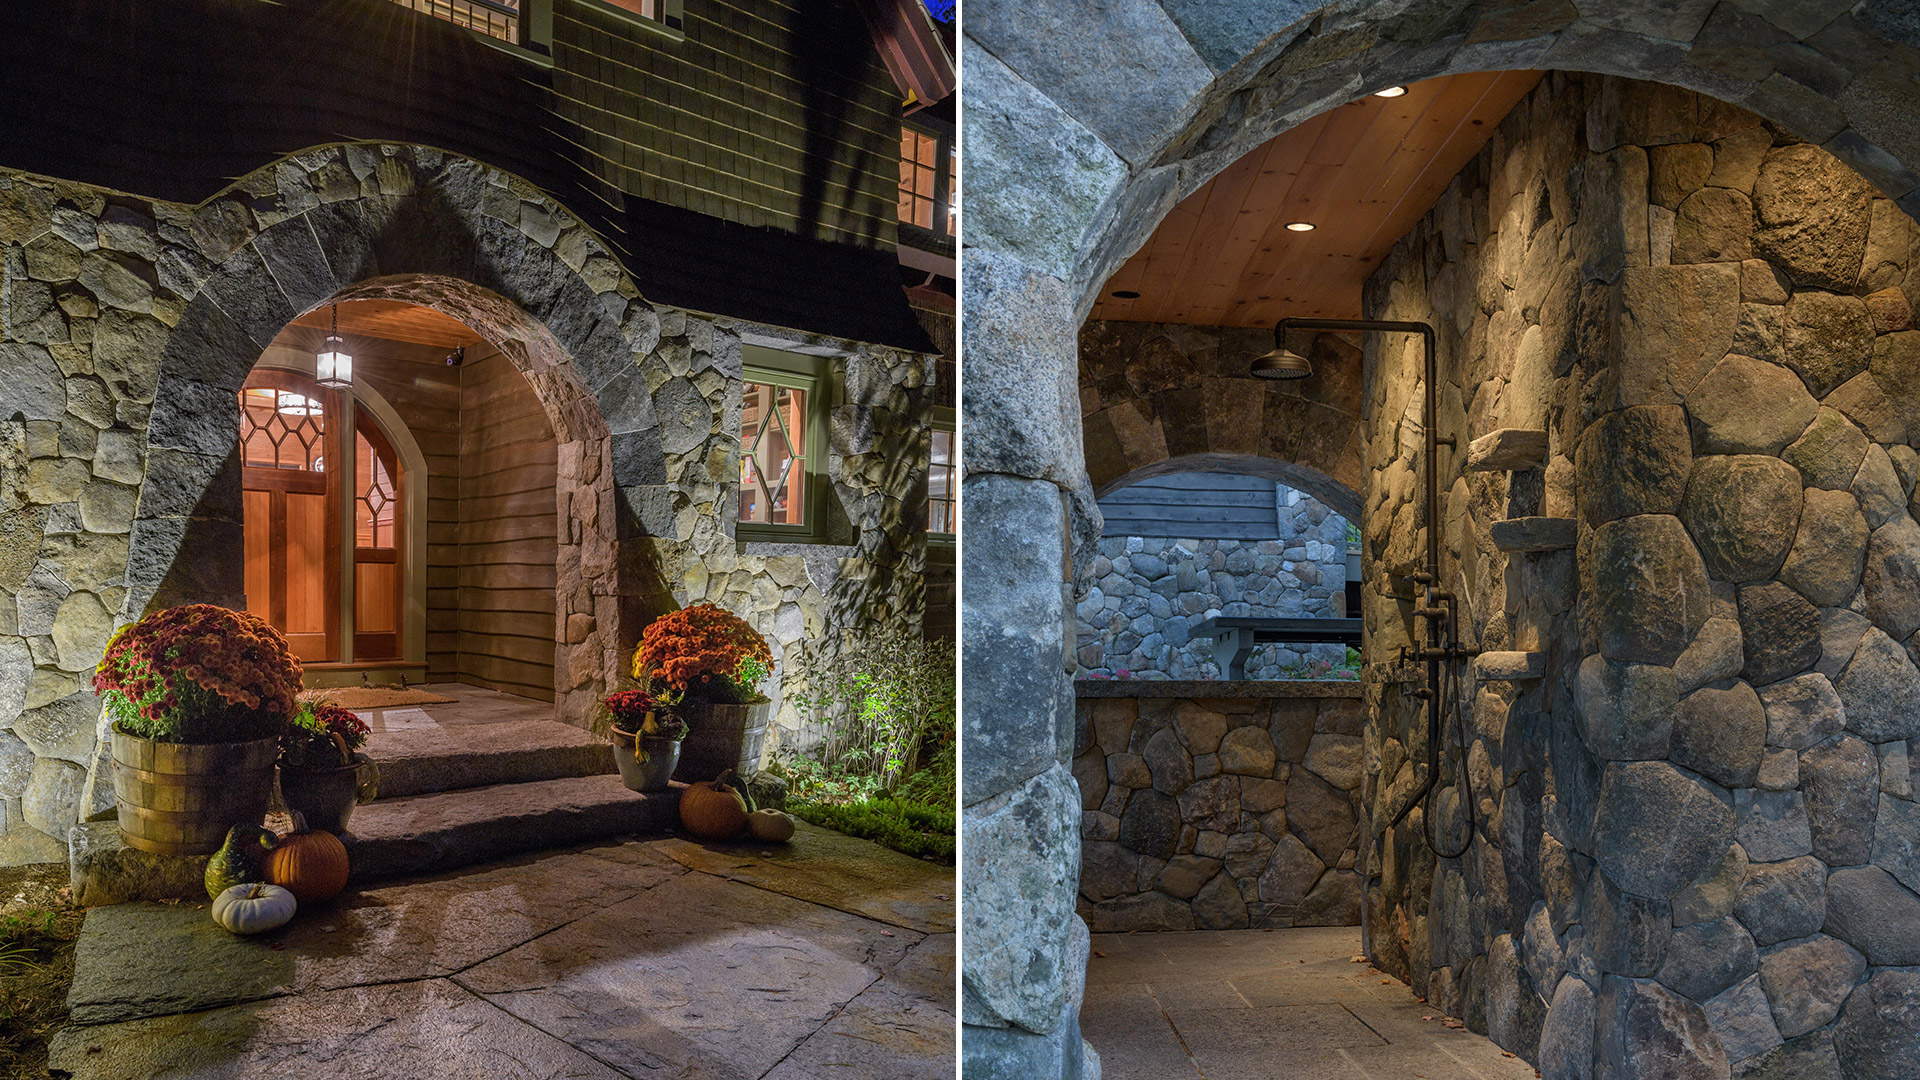 Alton, New Hampshire arched stone entrance and stone outdoor shower